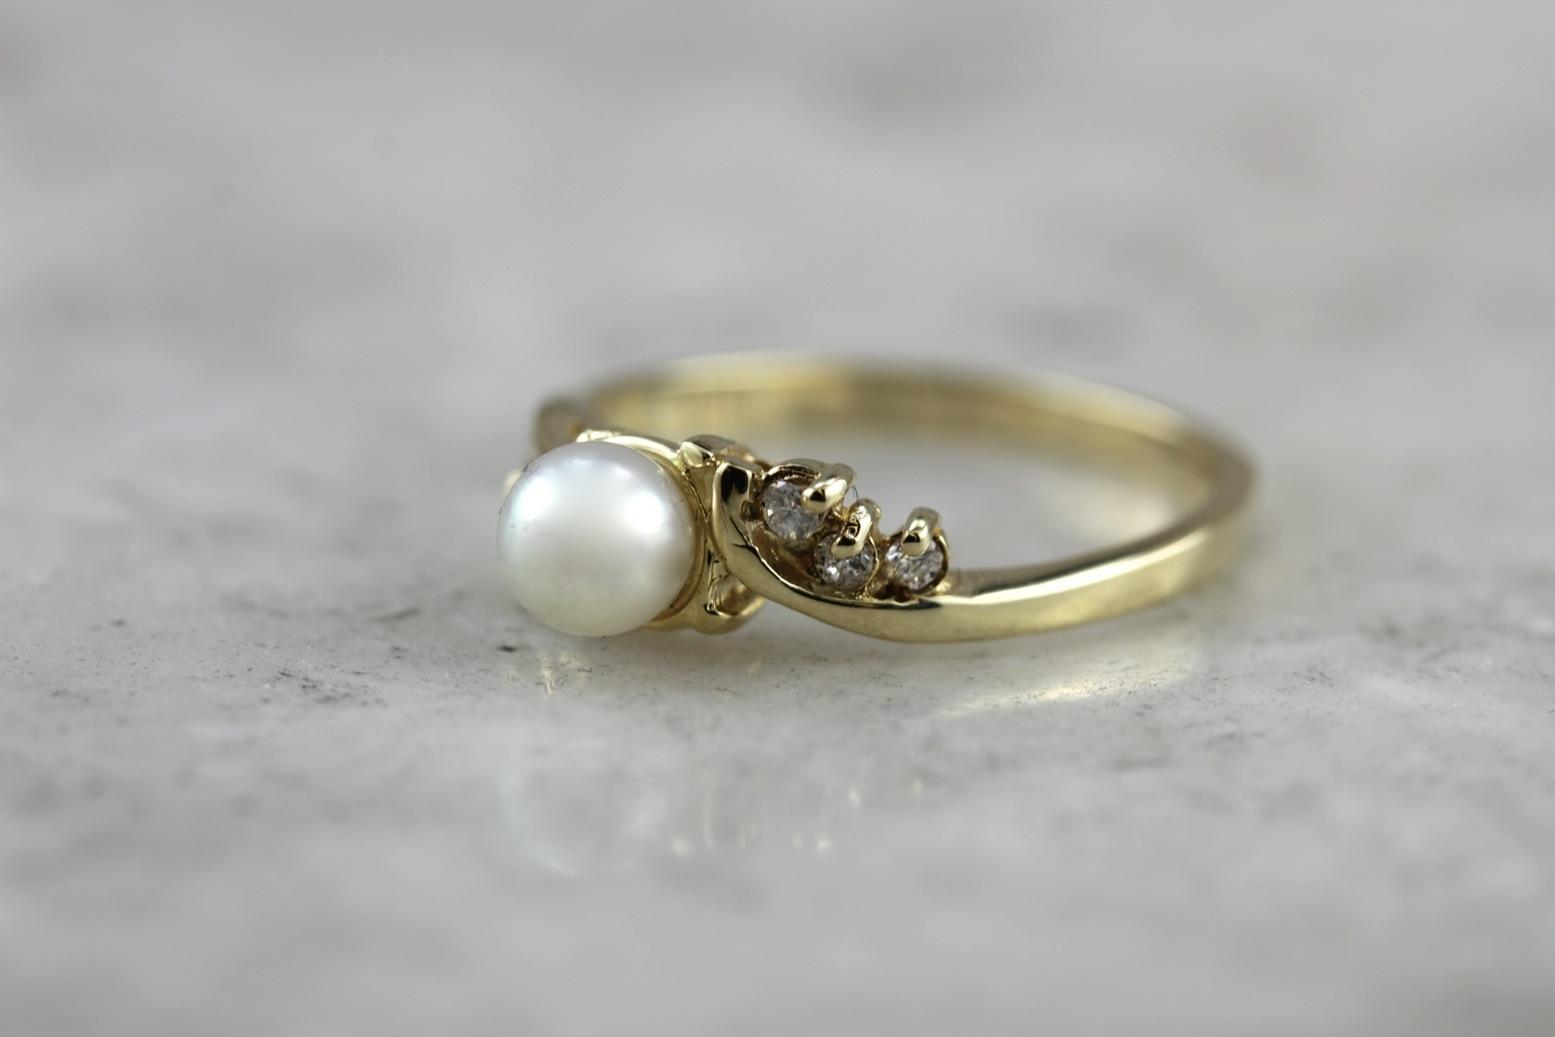 Elongated 8x13mm Oval Moissanite Pearl Engagement Ring 14K Yellow Gold